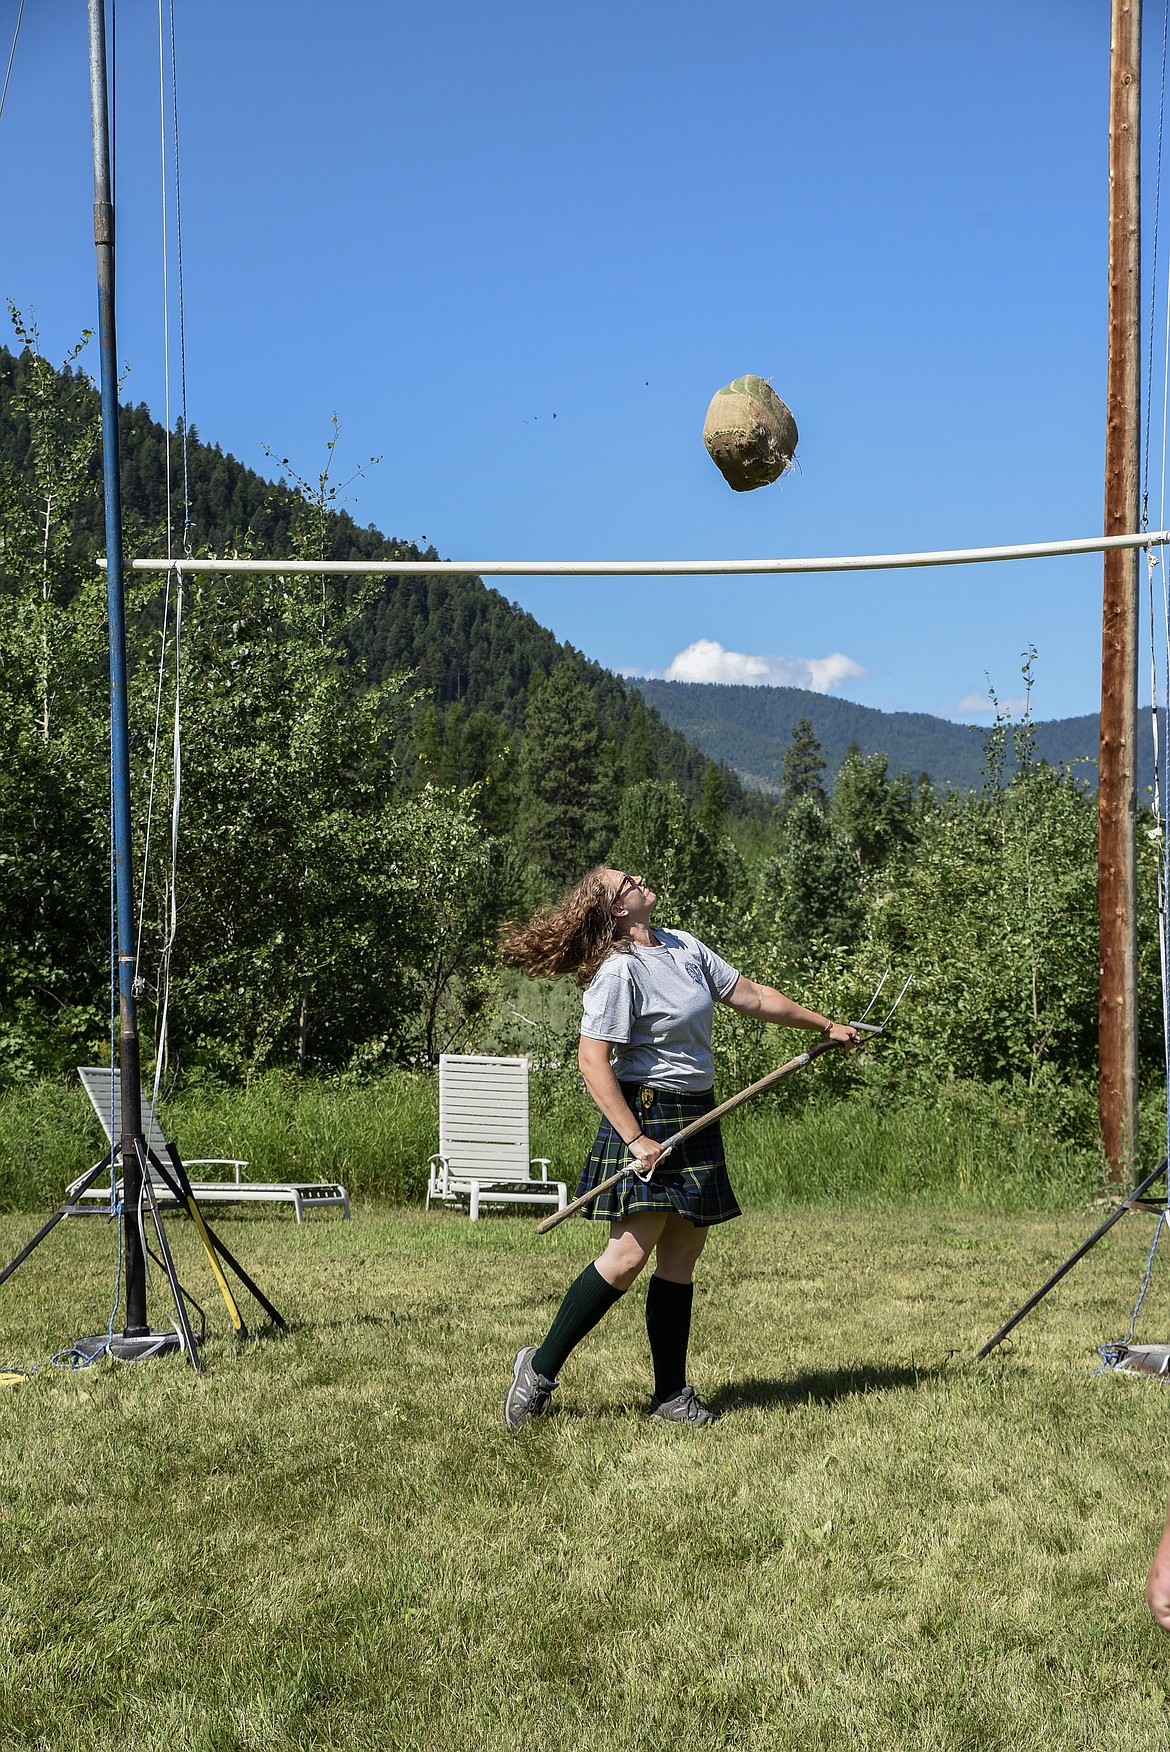 Kyle O'Neill, from Missoula, competes in the sheaf toss Saturday at the Kootenai Highland Gathering and Celtic Games. (Ben Kibbey/The Western News)